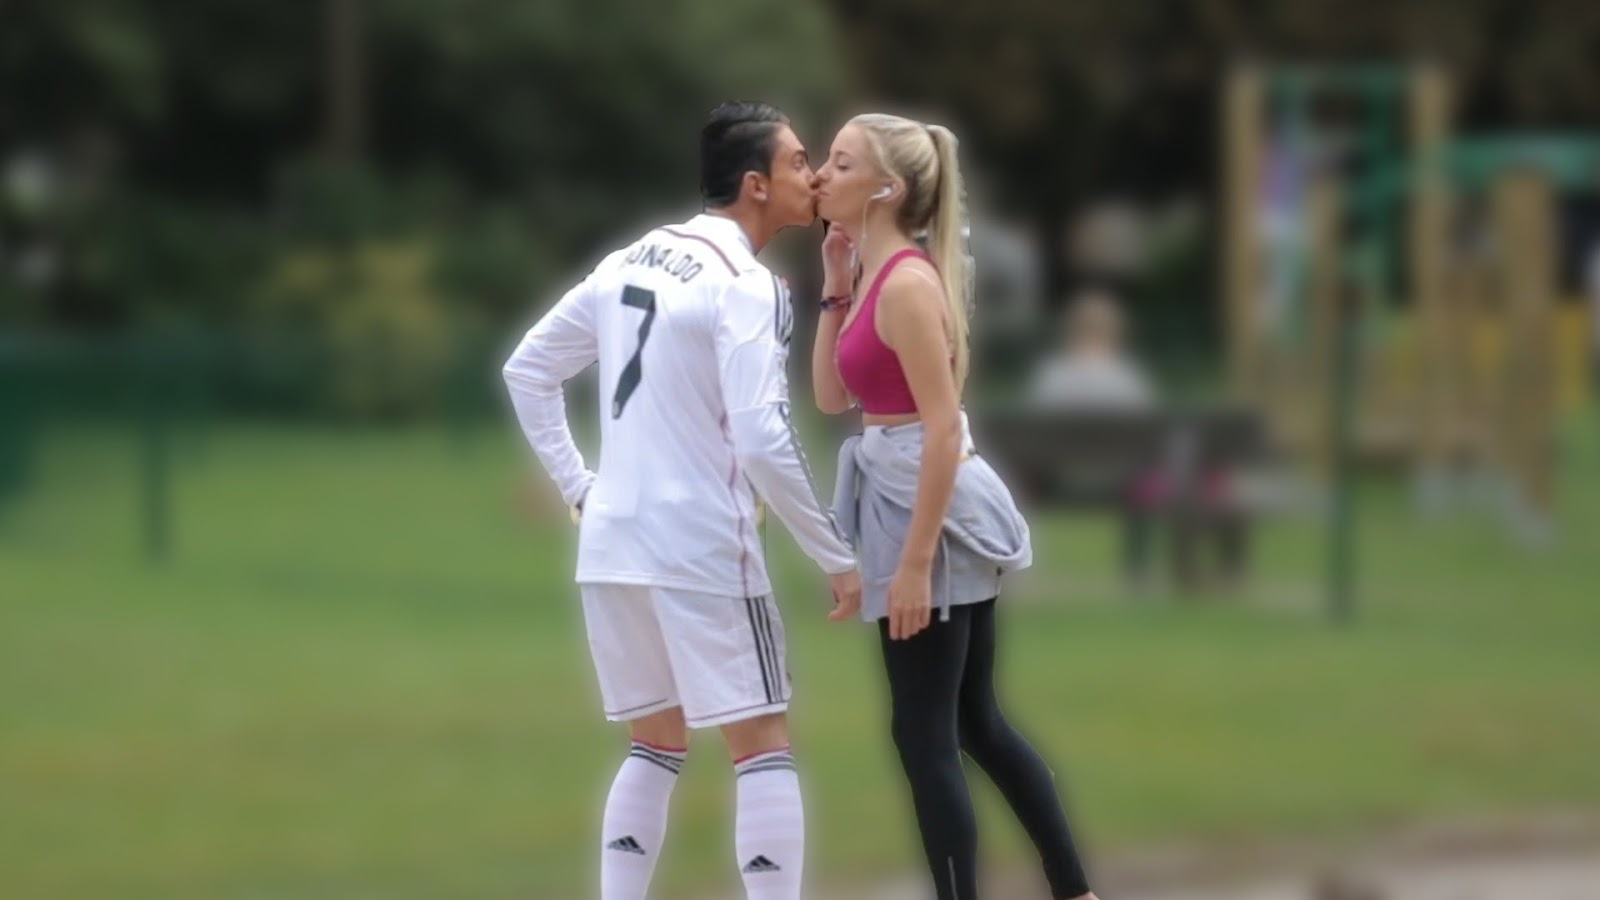 College blonde sucking football player pictures